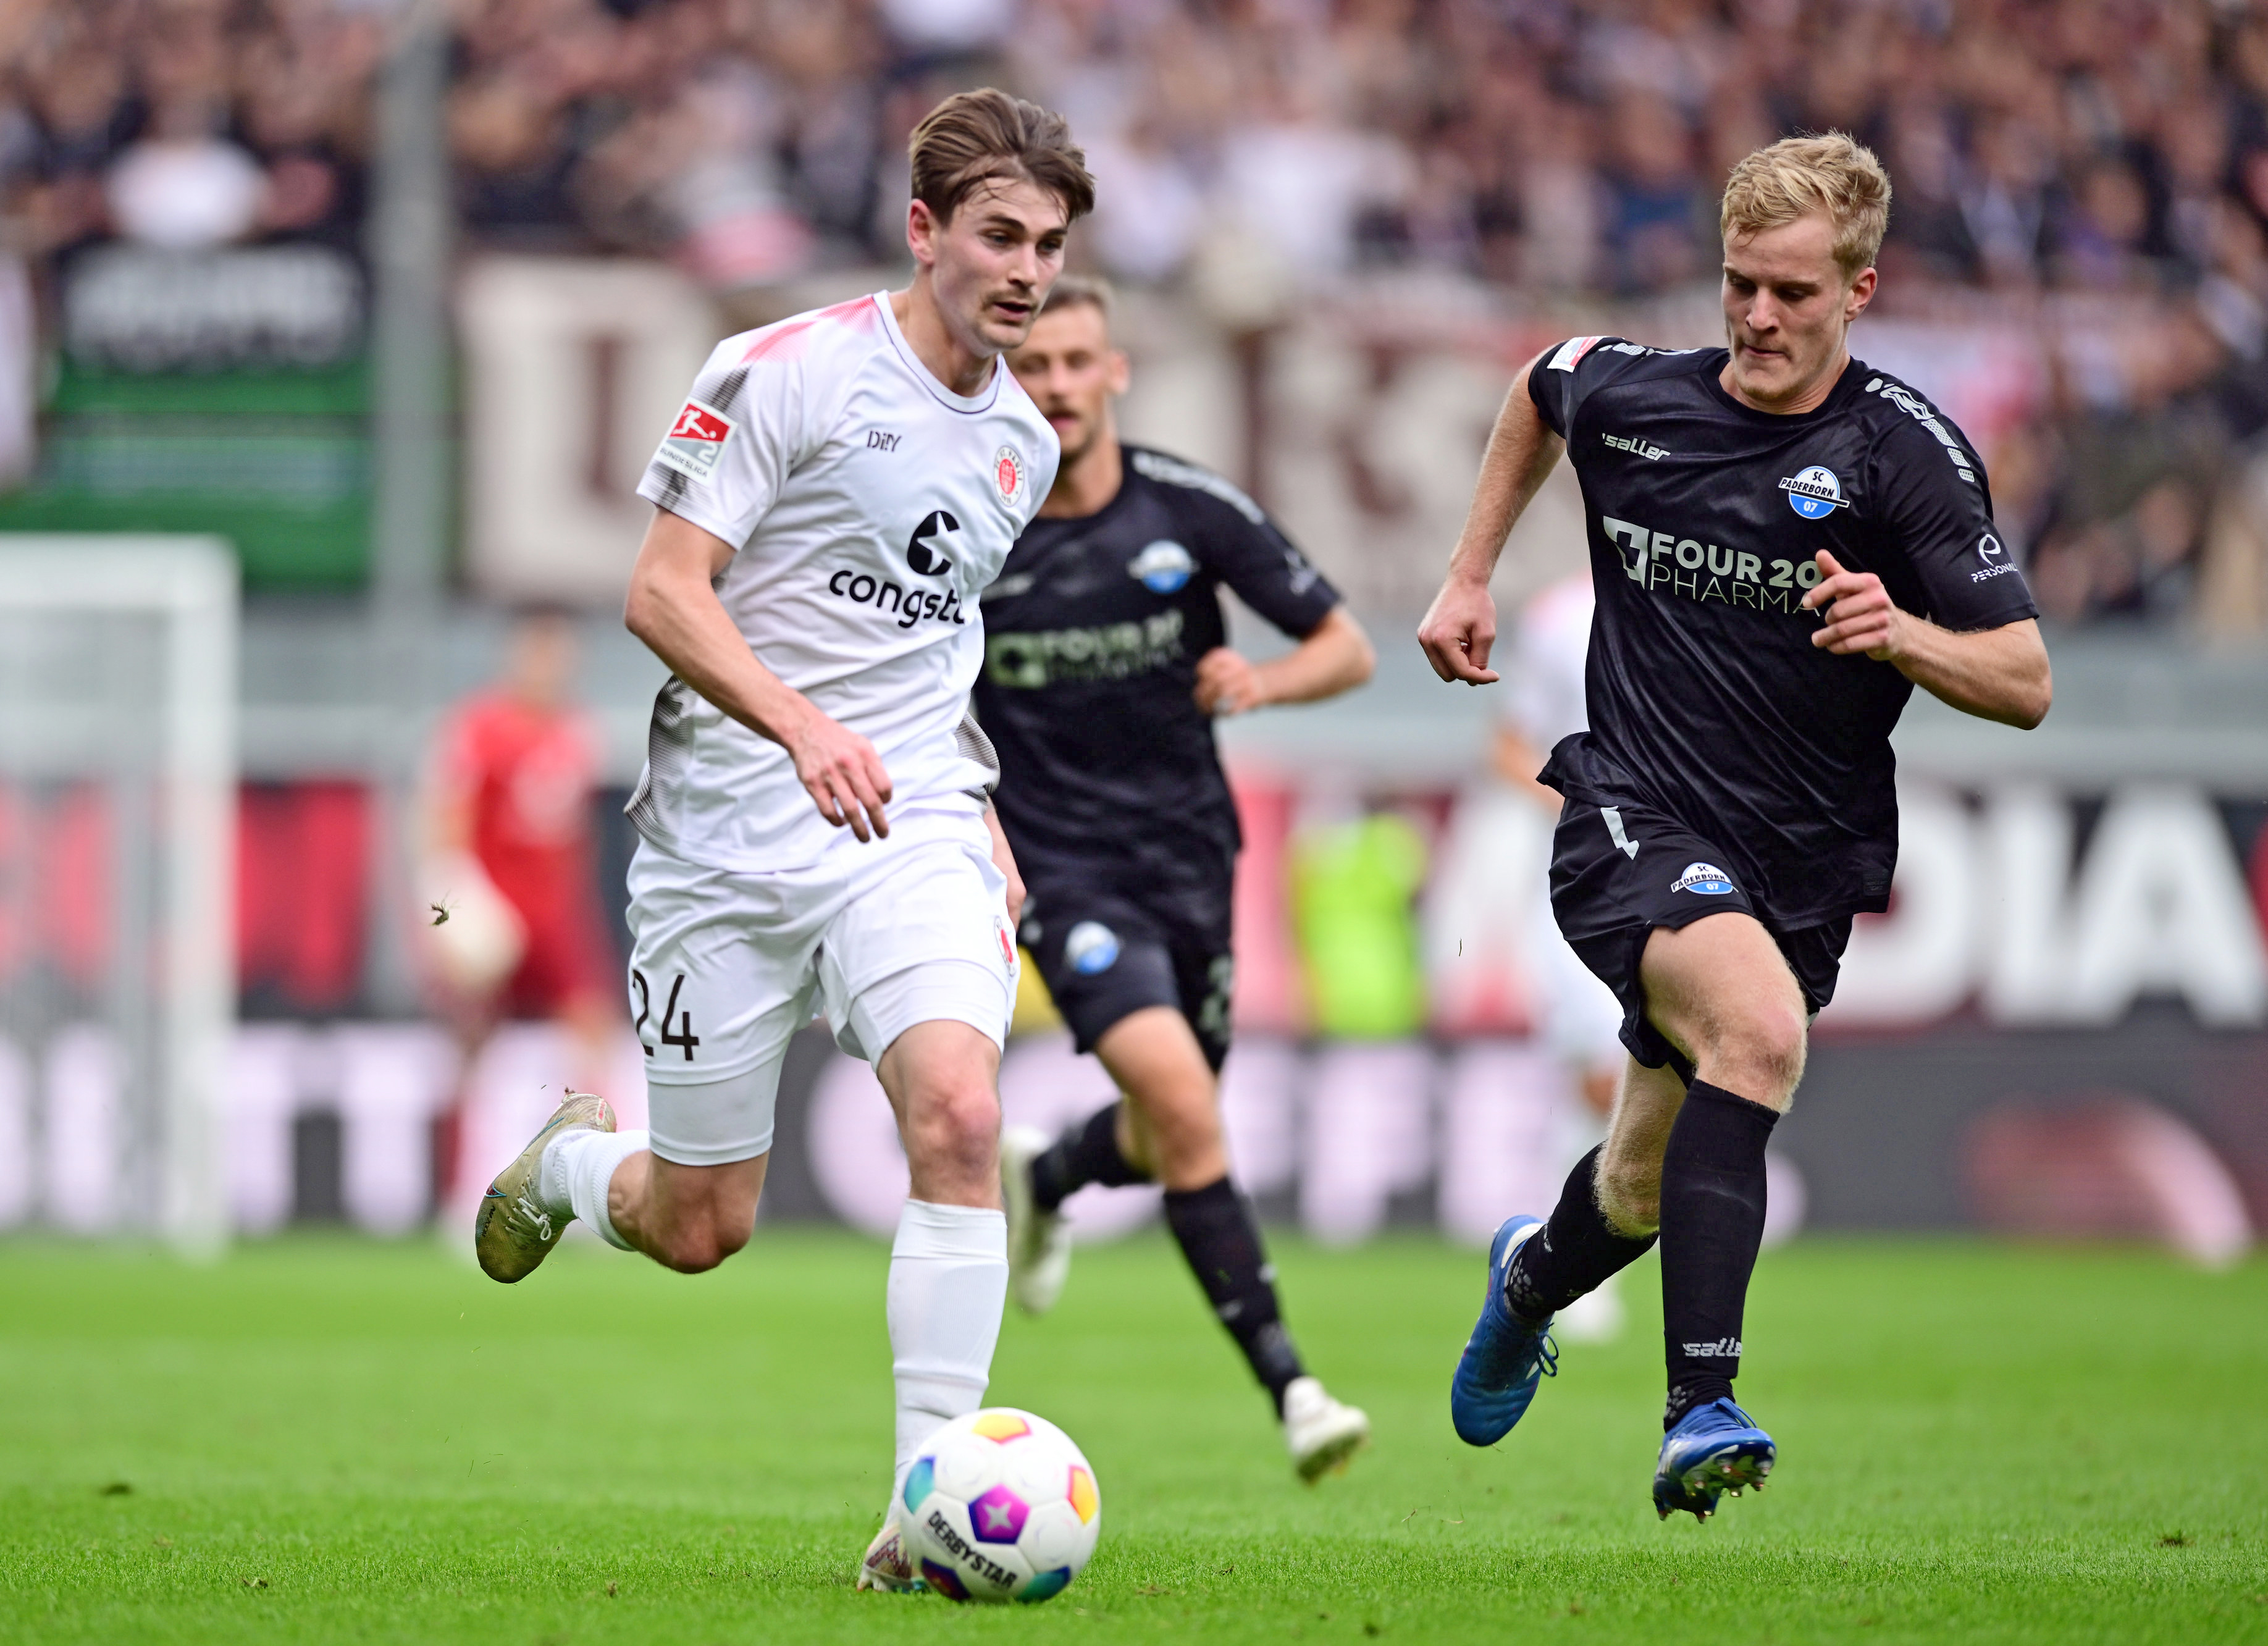 Connor Metcalfe came on after the interval against Paderborn.